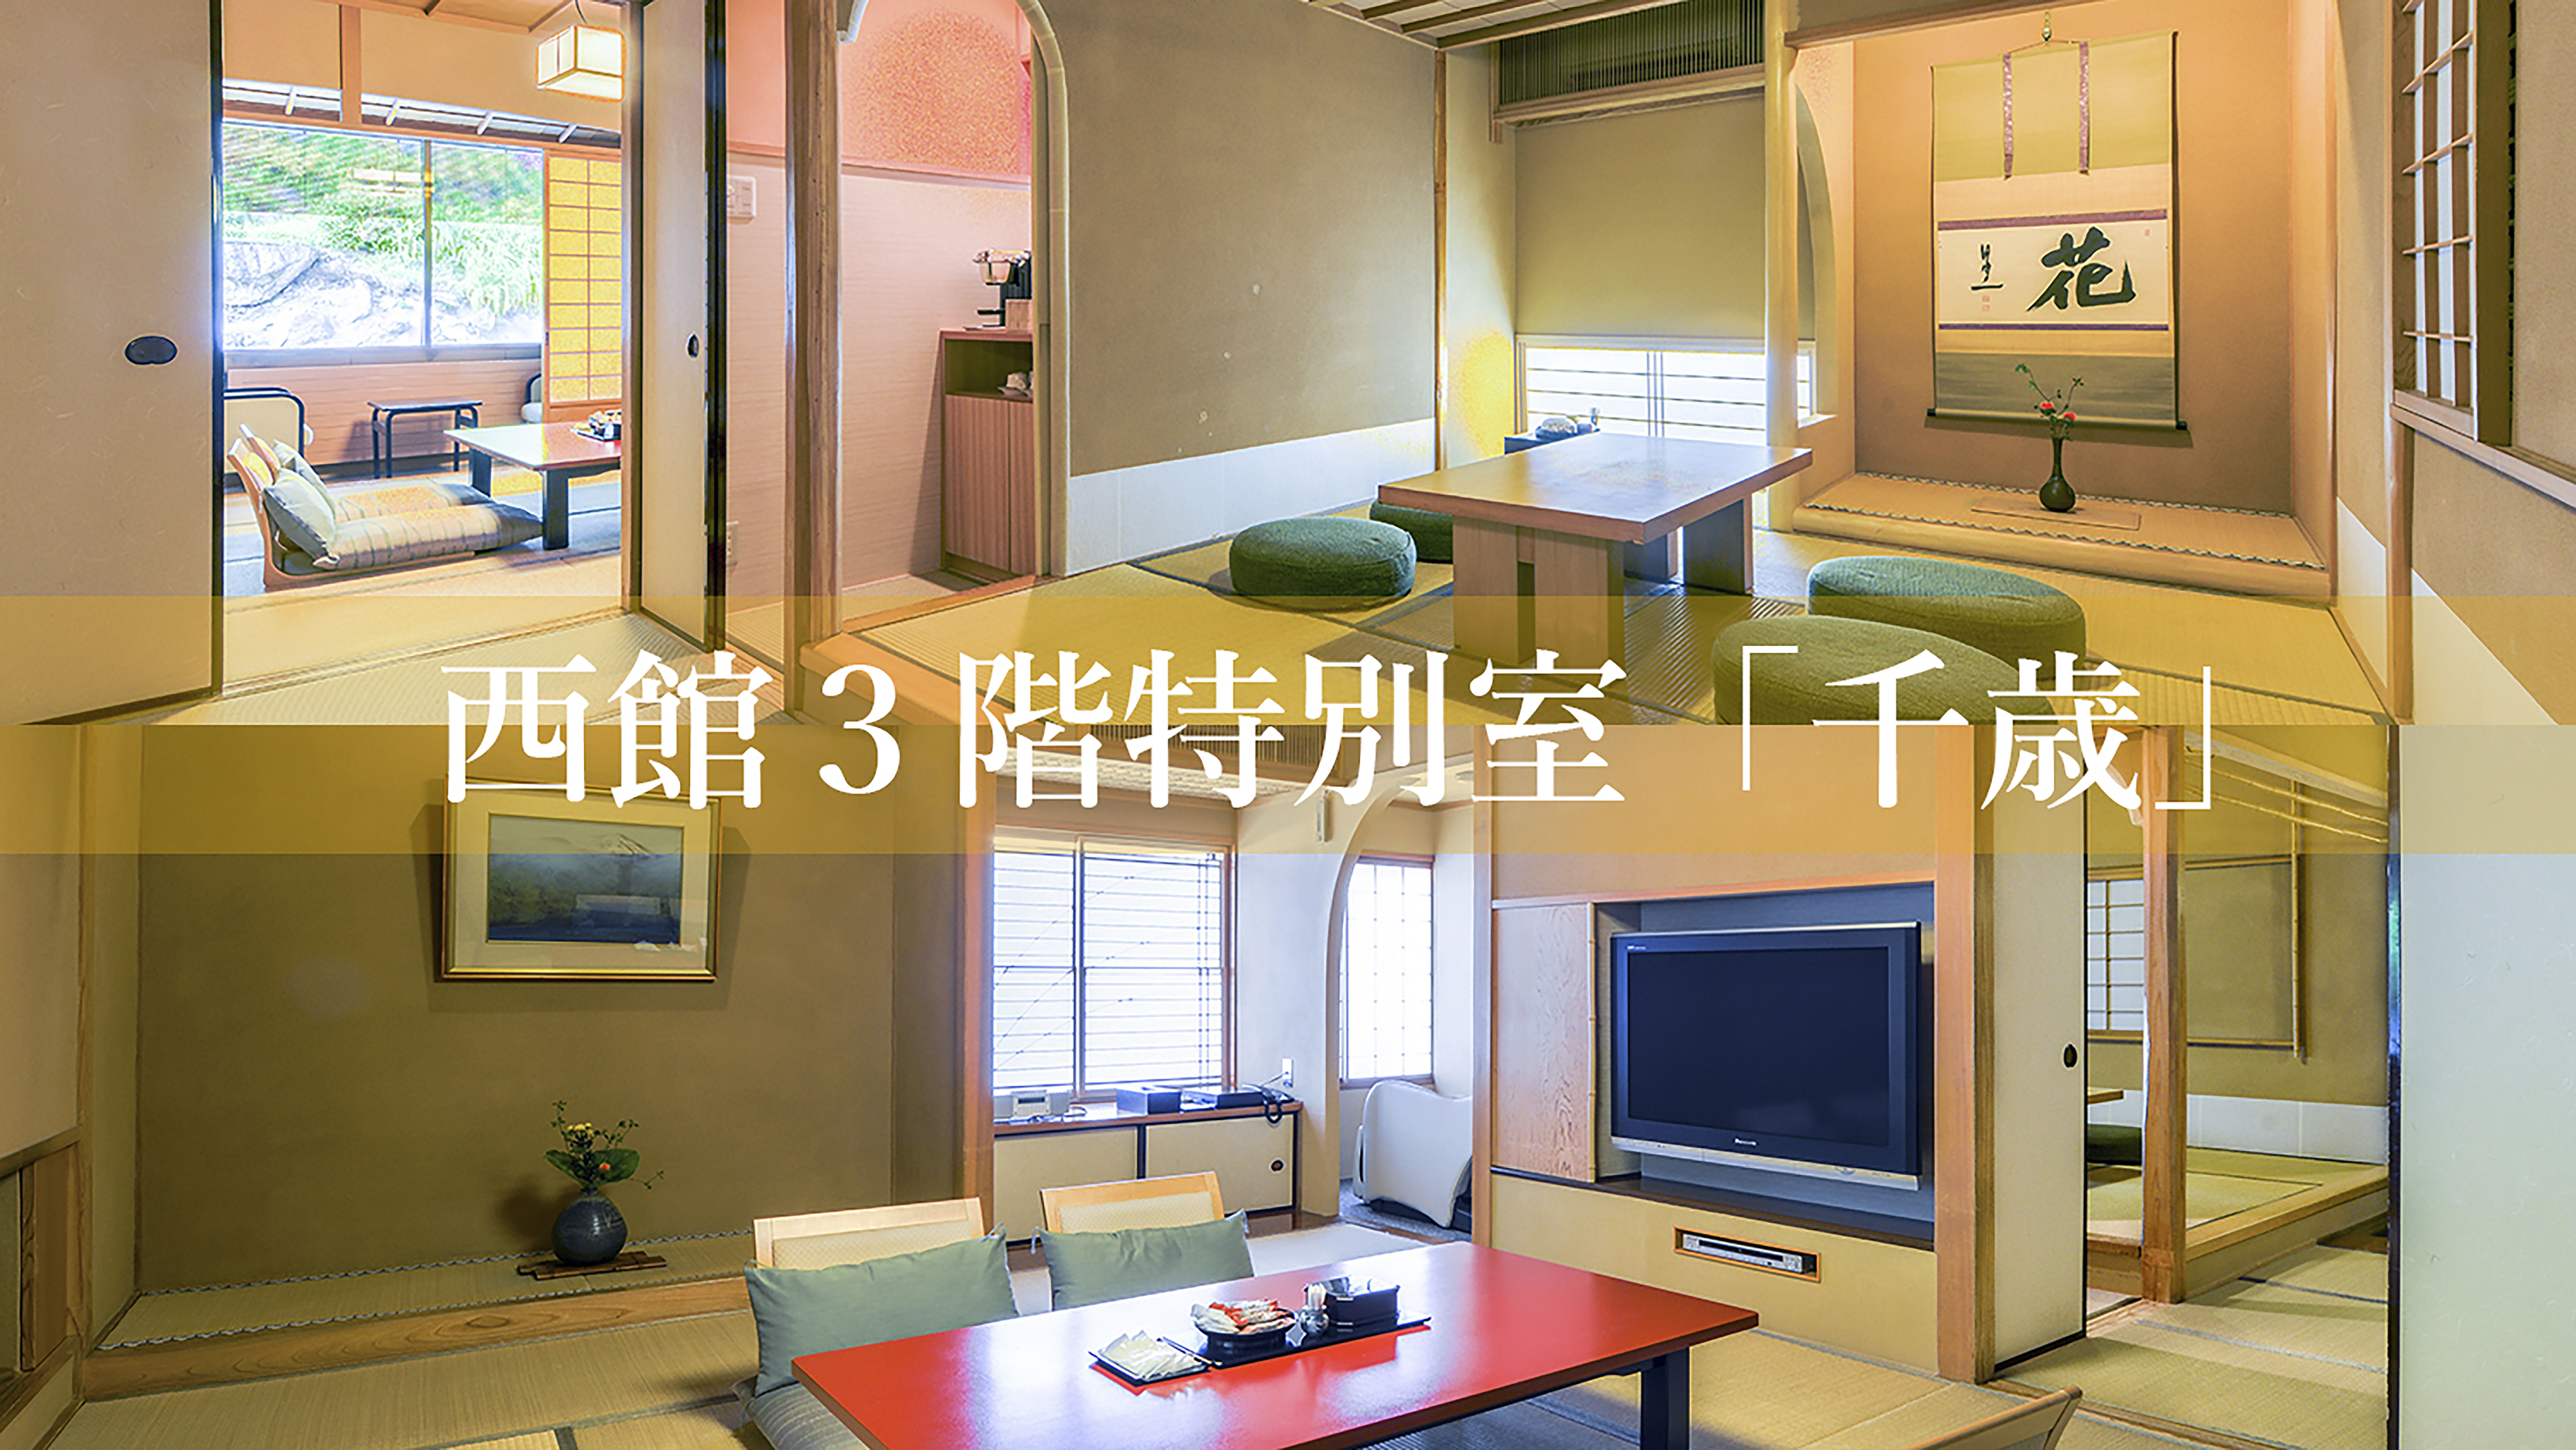 West Building 3rd floor 12 tatami Japanese-style room "Chitose"